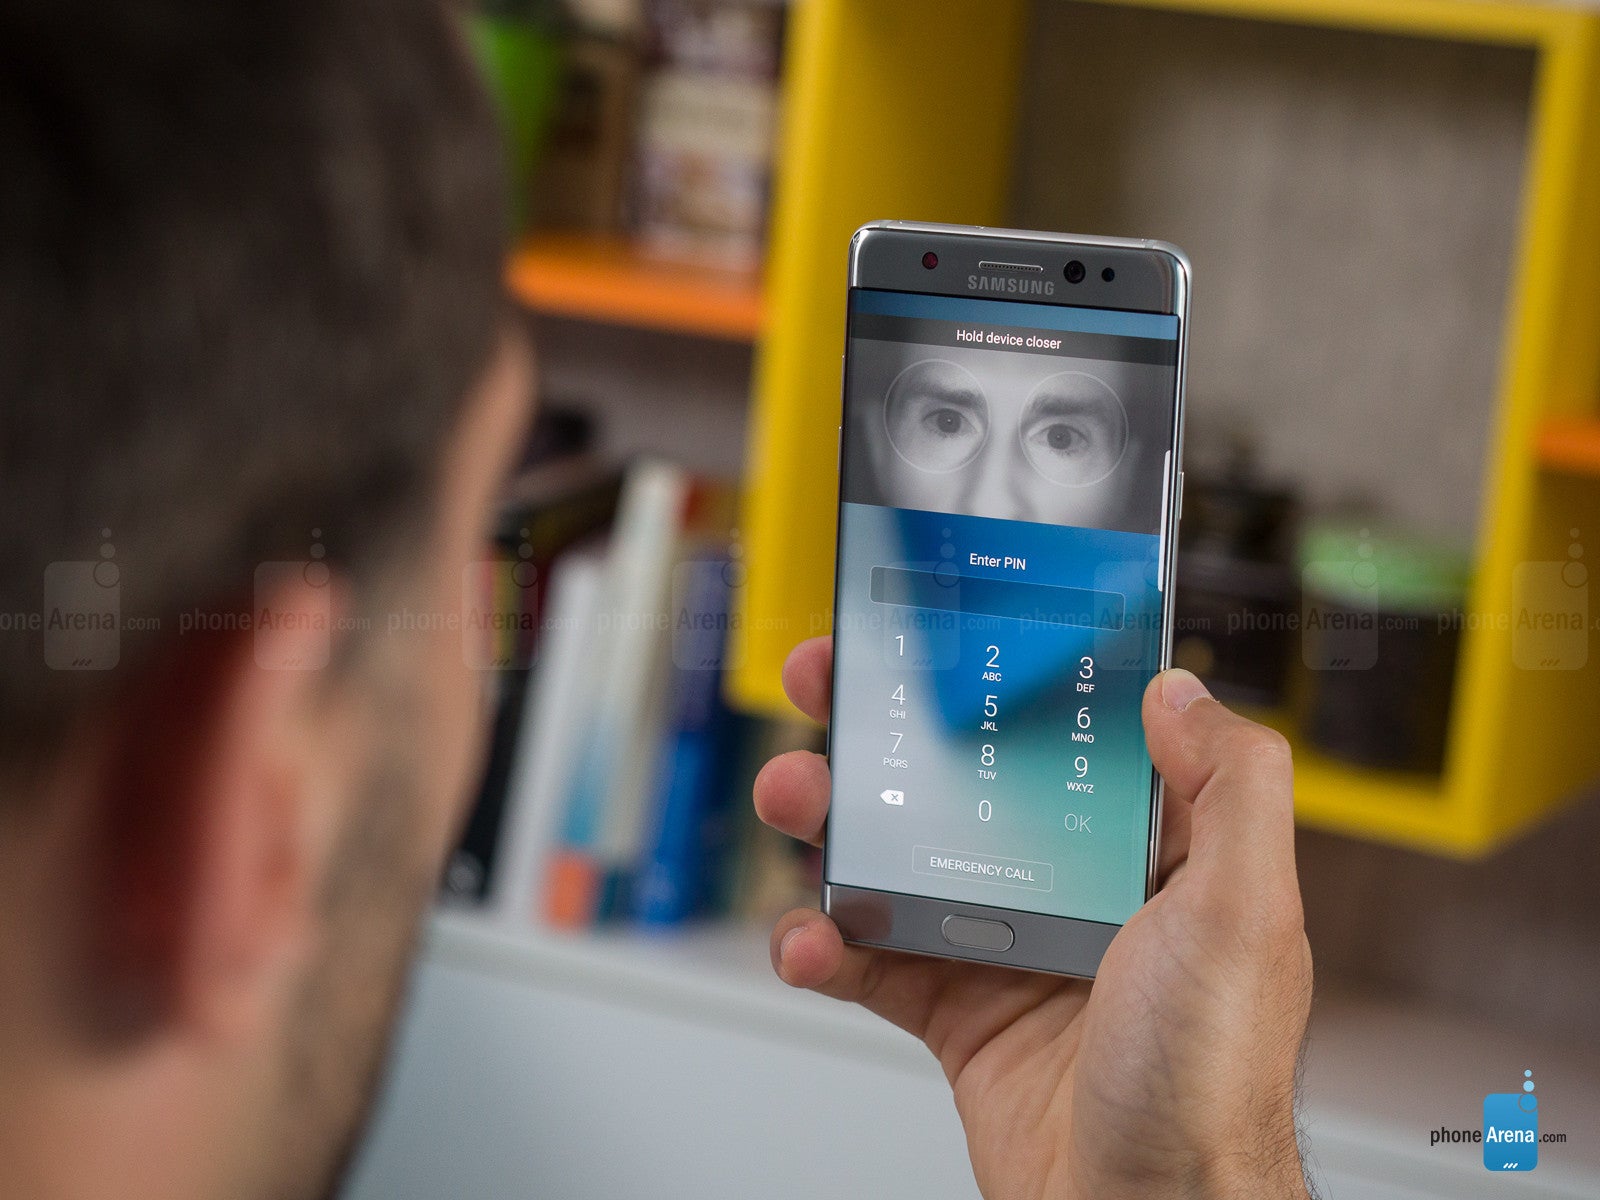 Note 7's iris scanner will probably arrive on the Galaxy S8/S8+ as well - Samsung Galaxy S8, Galaxy S8+ rumor review: design, specs, features, price and release date